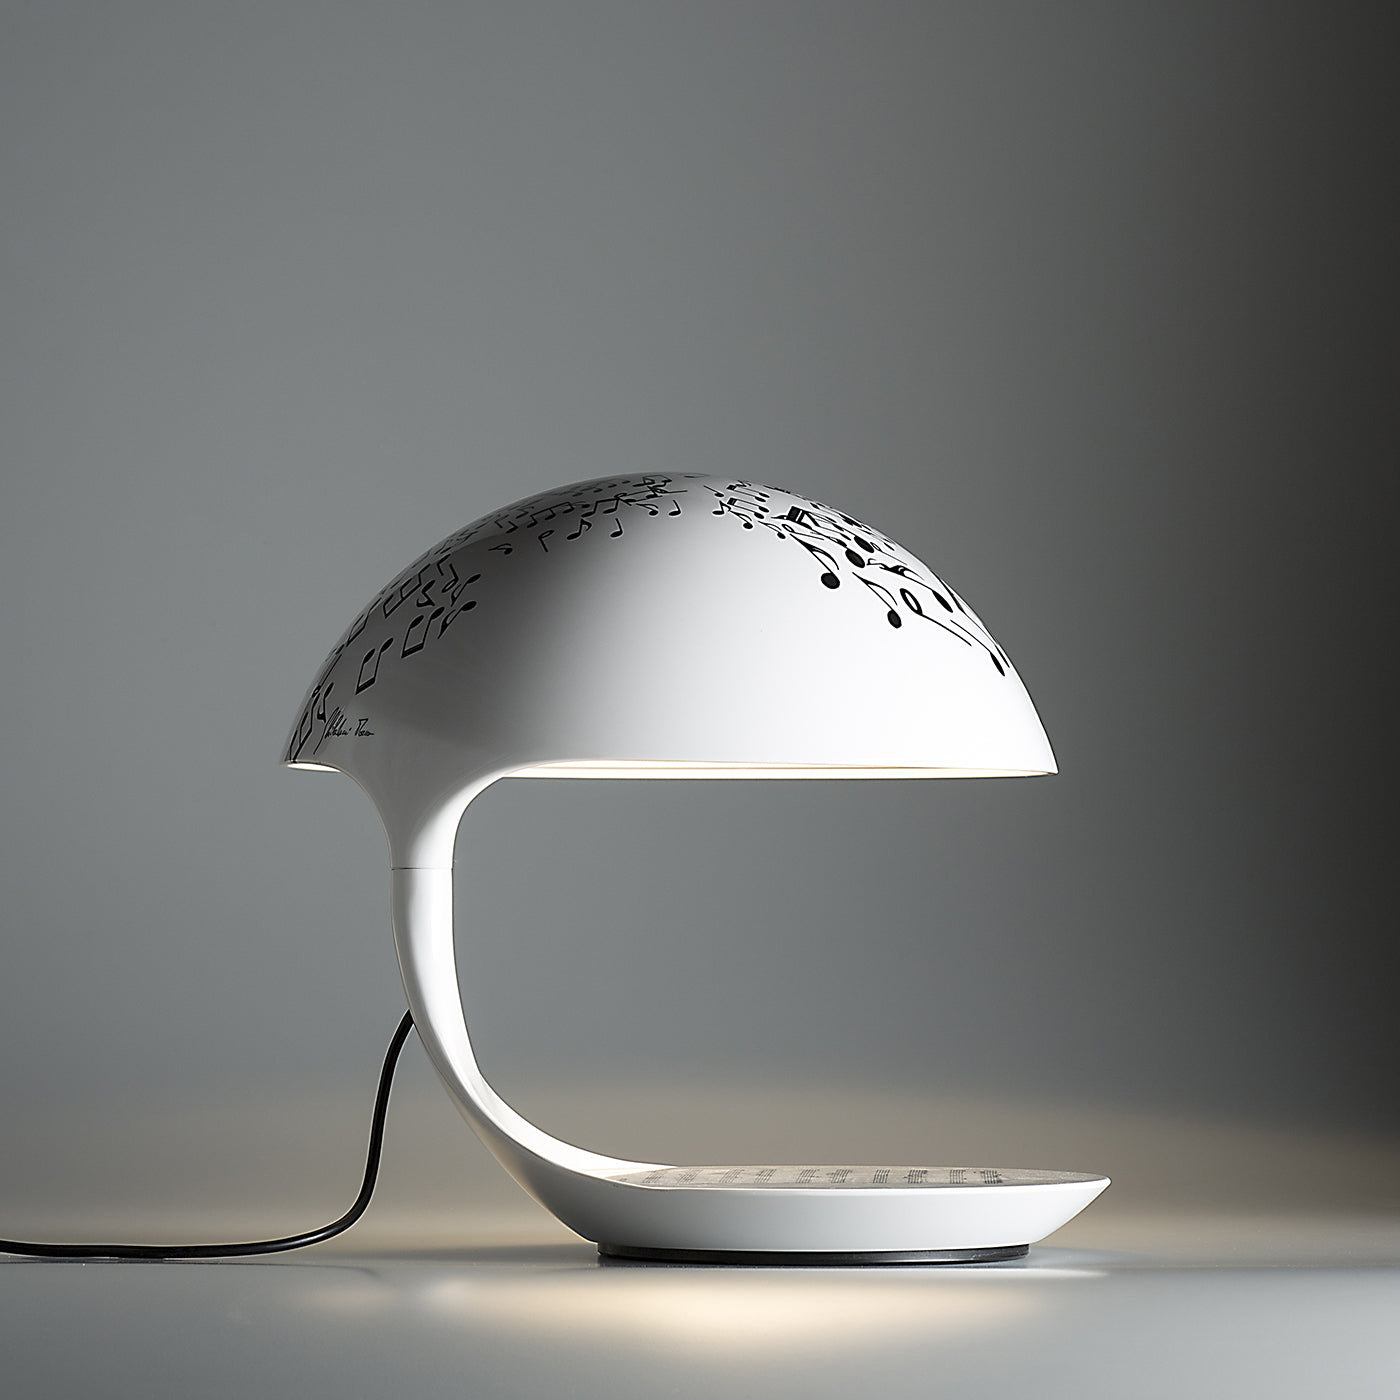 Cobra Texture Music Notes Table Lamp by Marco Ghilarducci - Alternative view 3